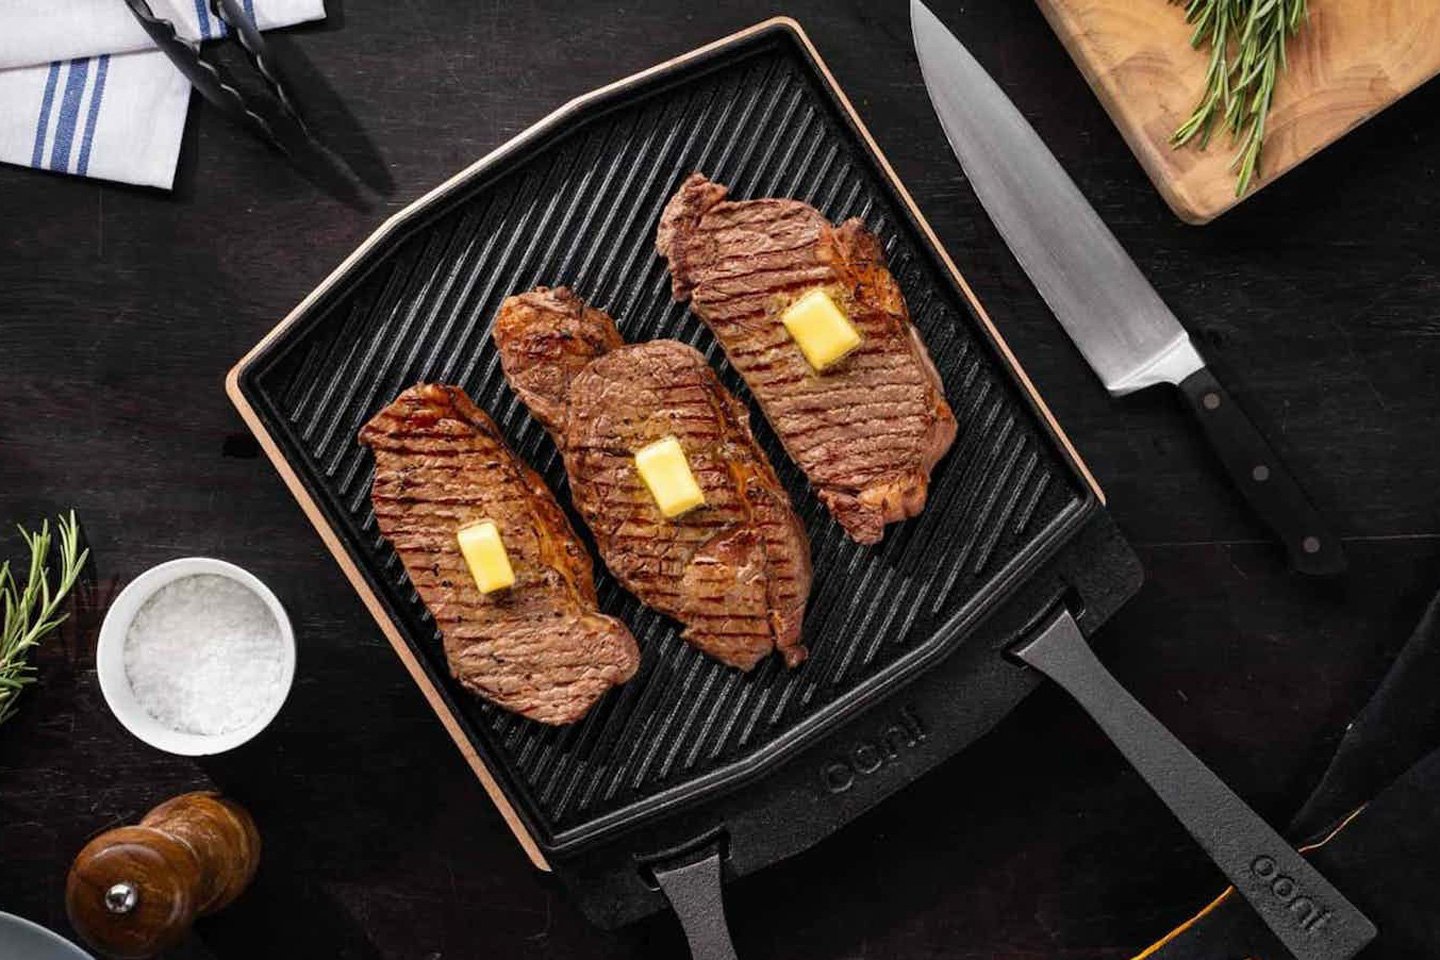 #Ooni’s Dual-Sided ‘Grizzler’ Plate works equally well for grilling hamburgers or sizzling veggies